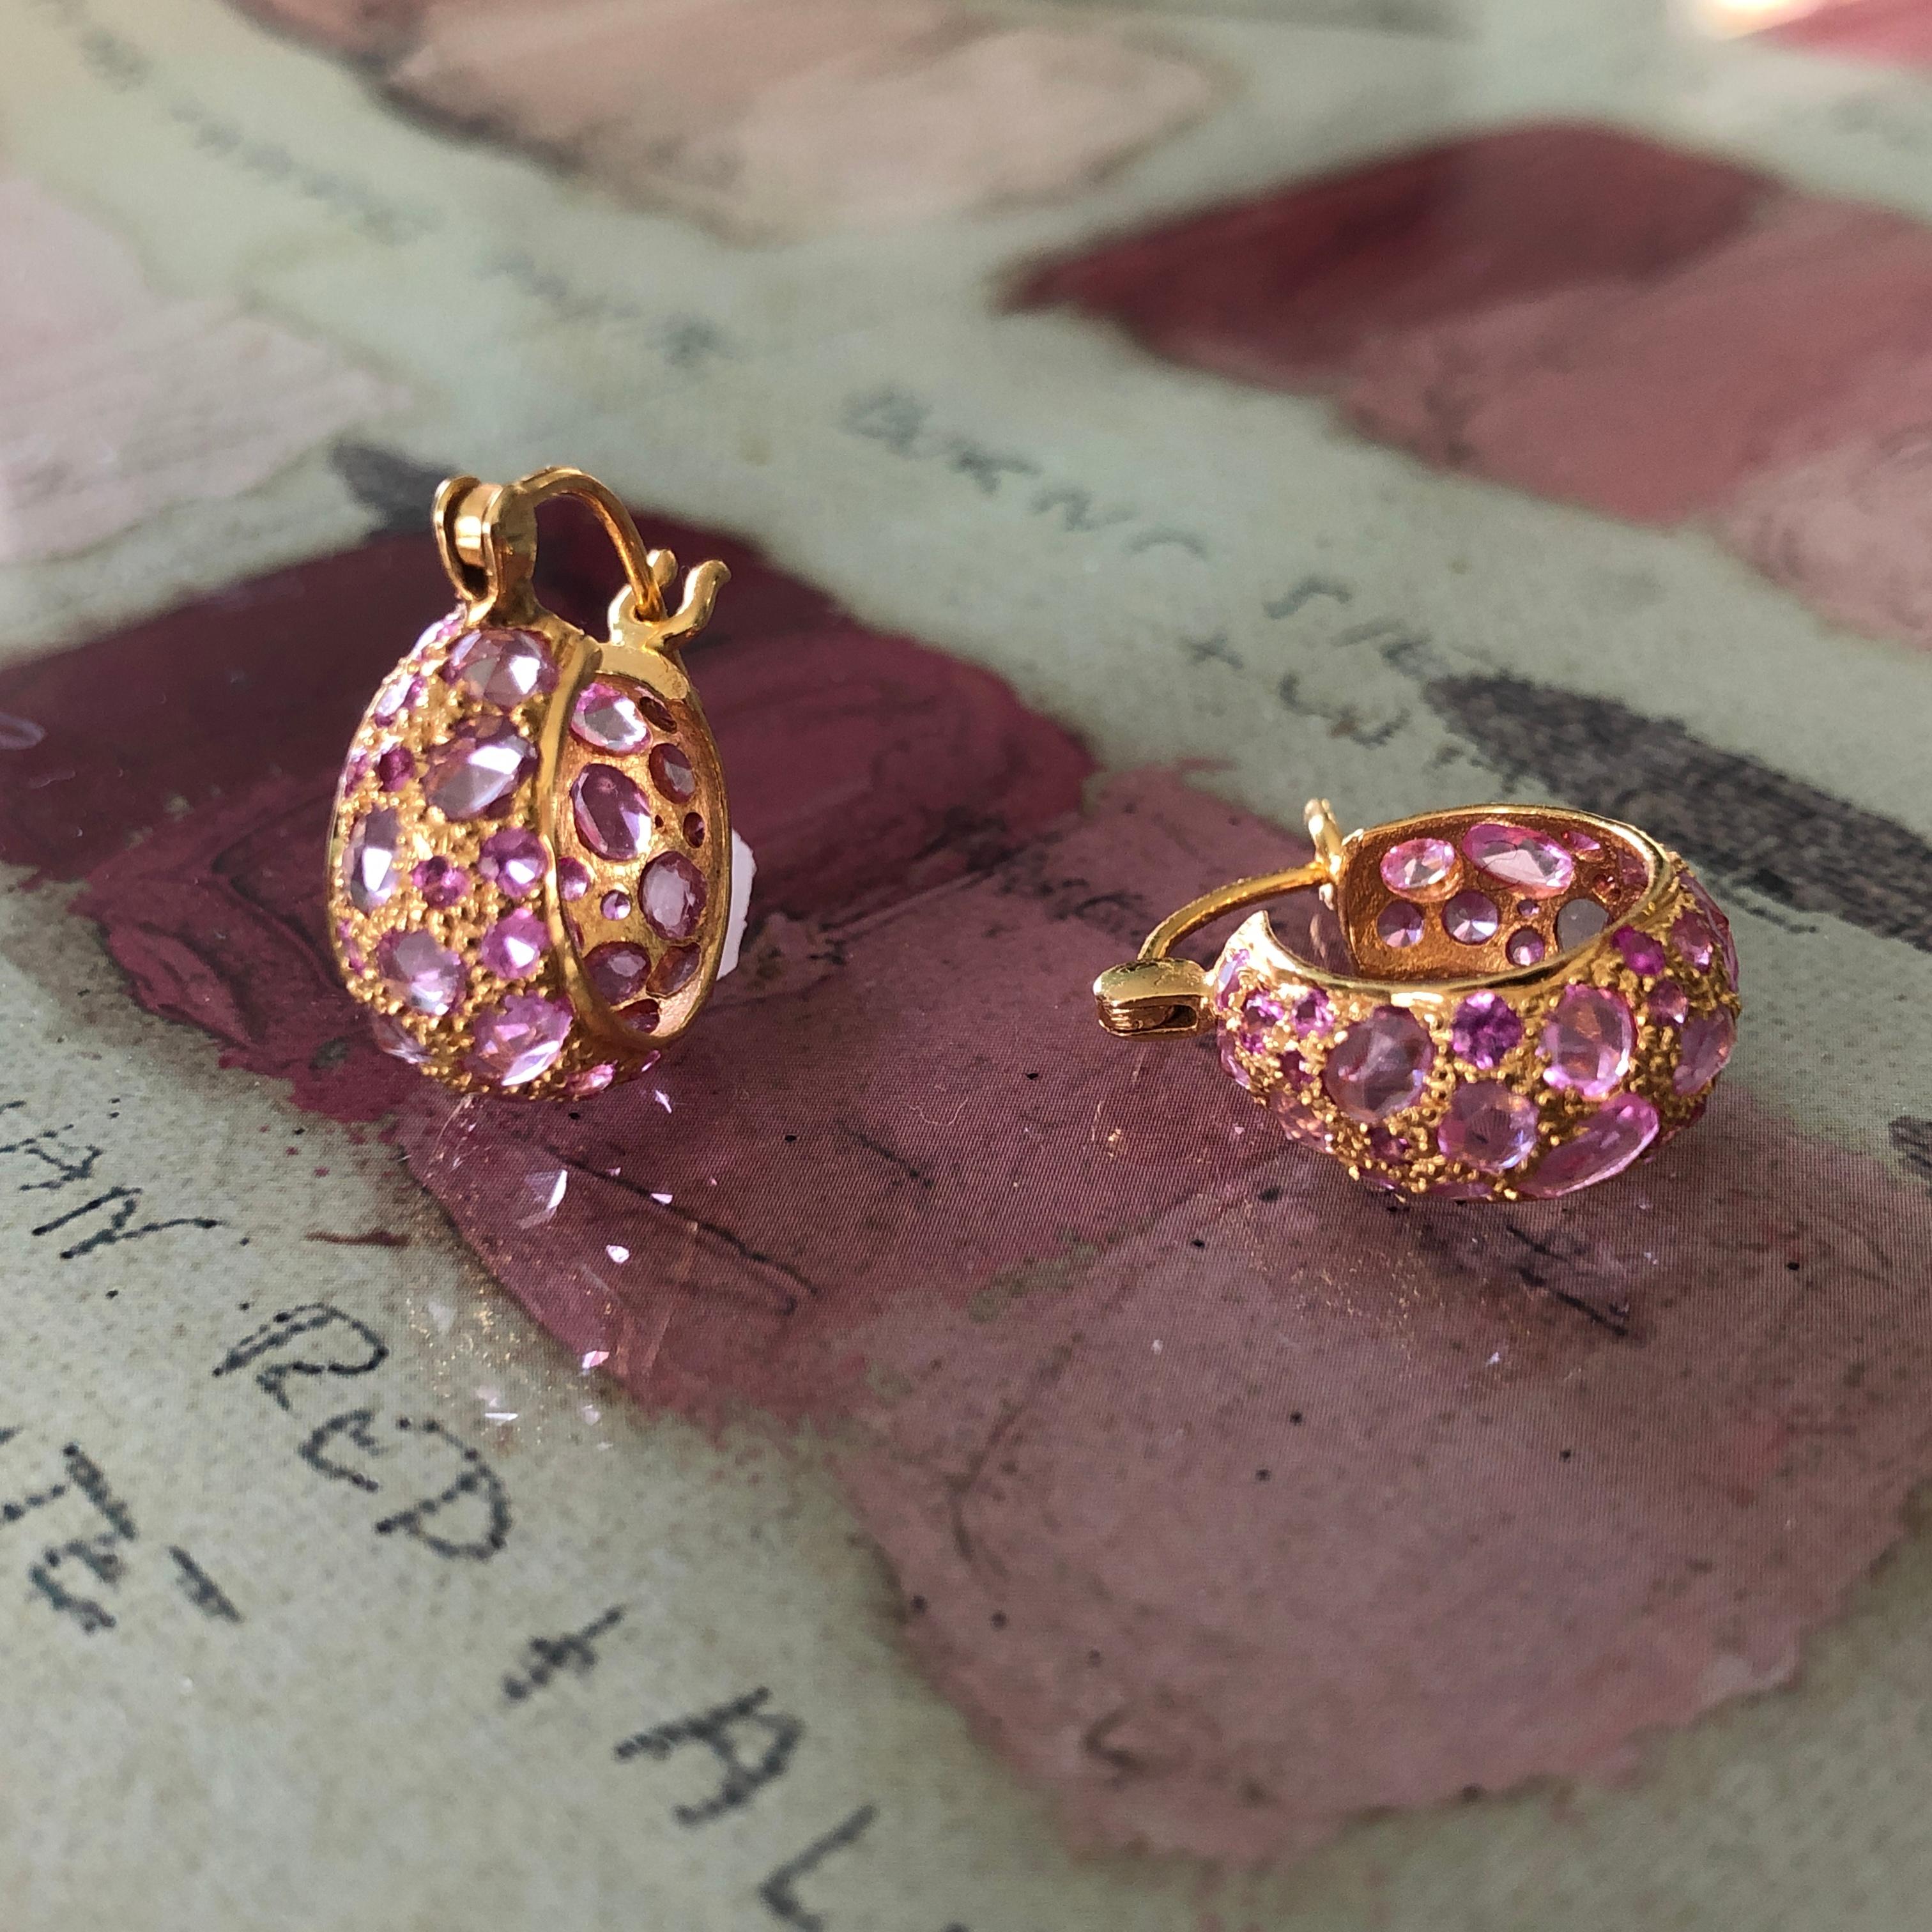 Lauren Harper 18kt Gold  and rose cut Pink Sapphire hoops will quickly become the earring you reach for every day to complete your look. Sparkly enough to catch the light but practical enough for every day. Lightweight and secure on the ear. Also